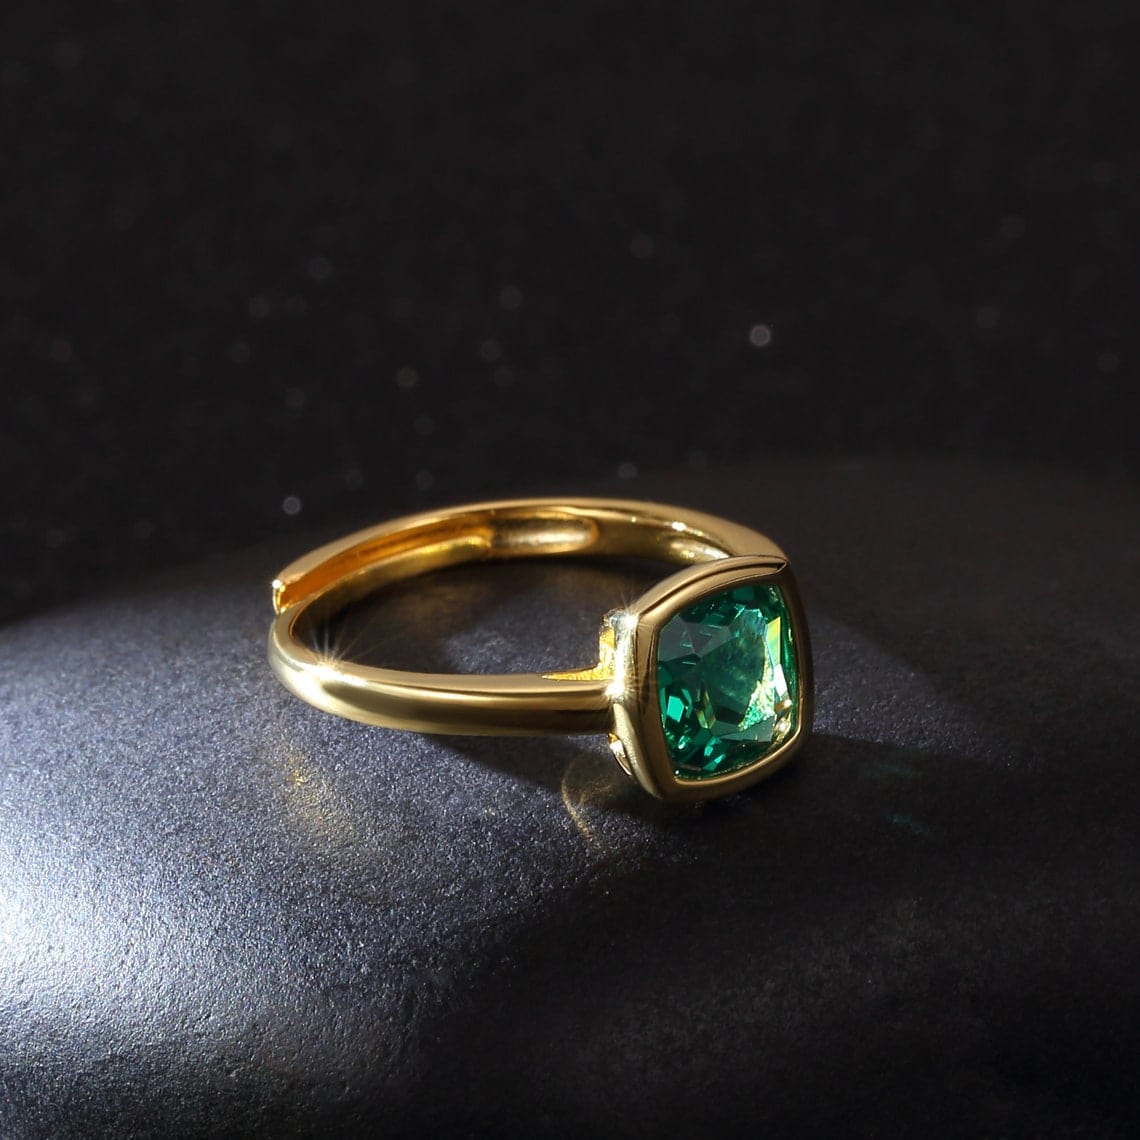 Bieauli Jewellery London emerald ring Vintage Emerald Engagement Ring - Gold Plated Sterling Silver